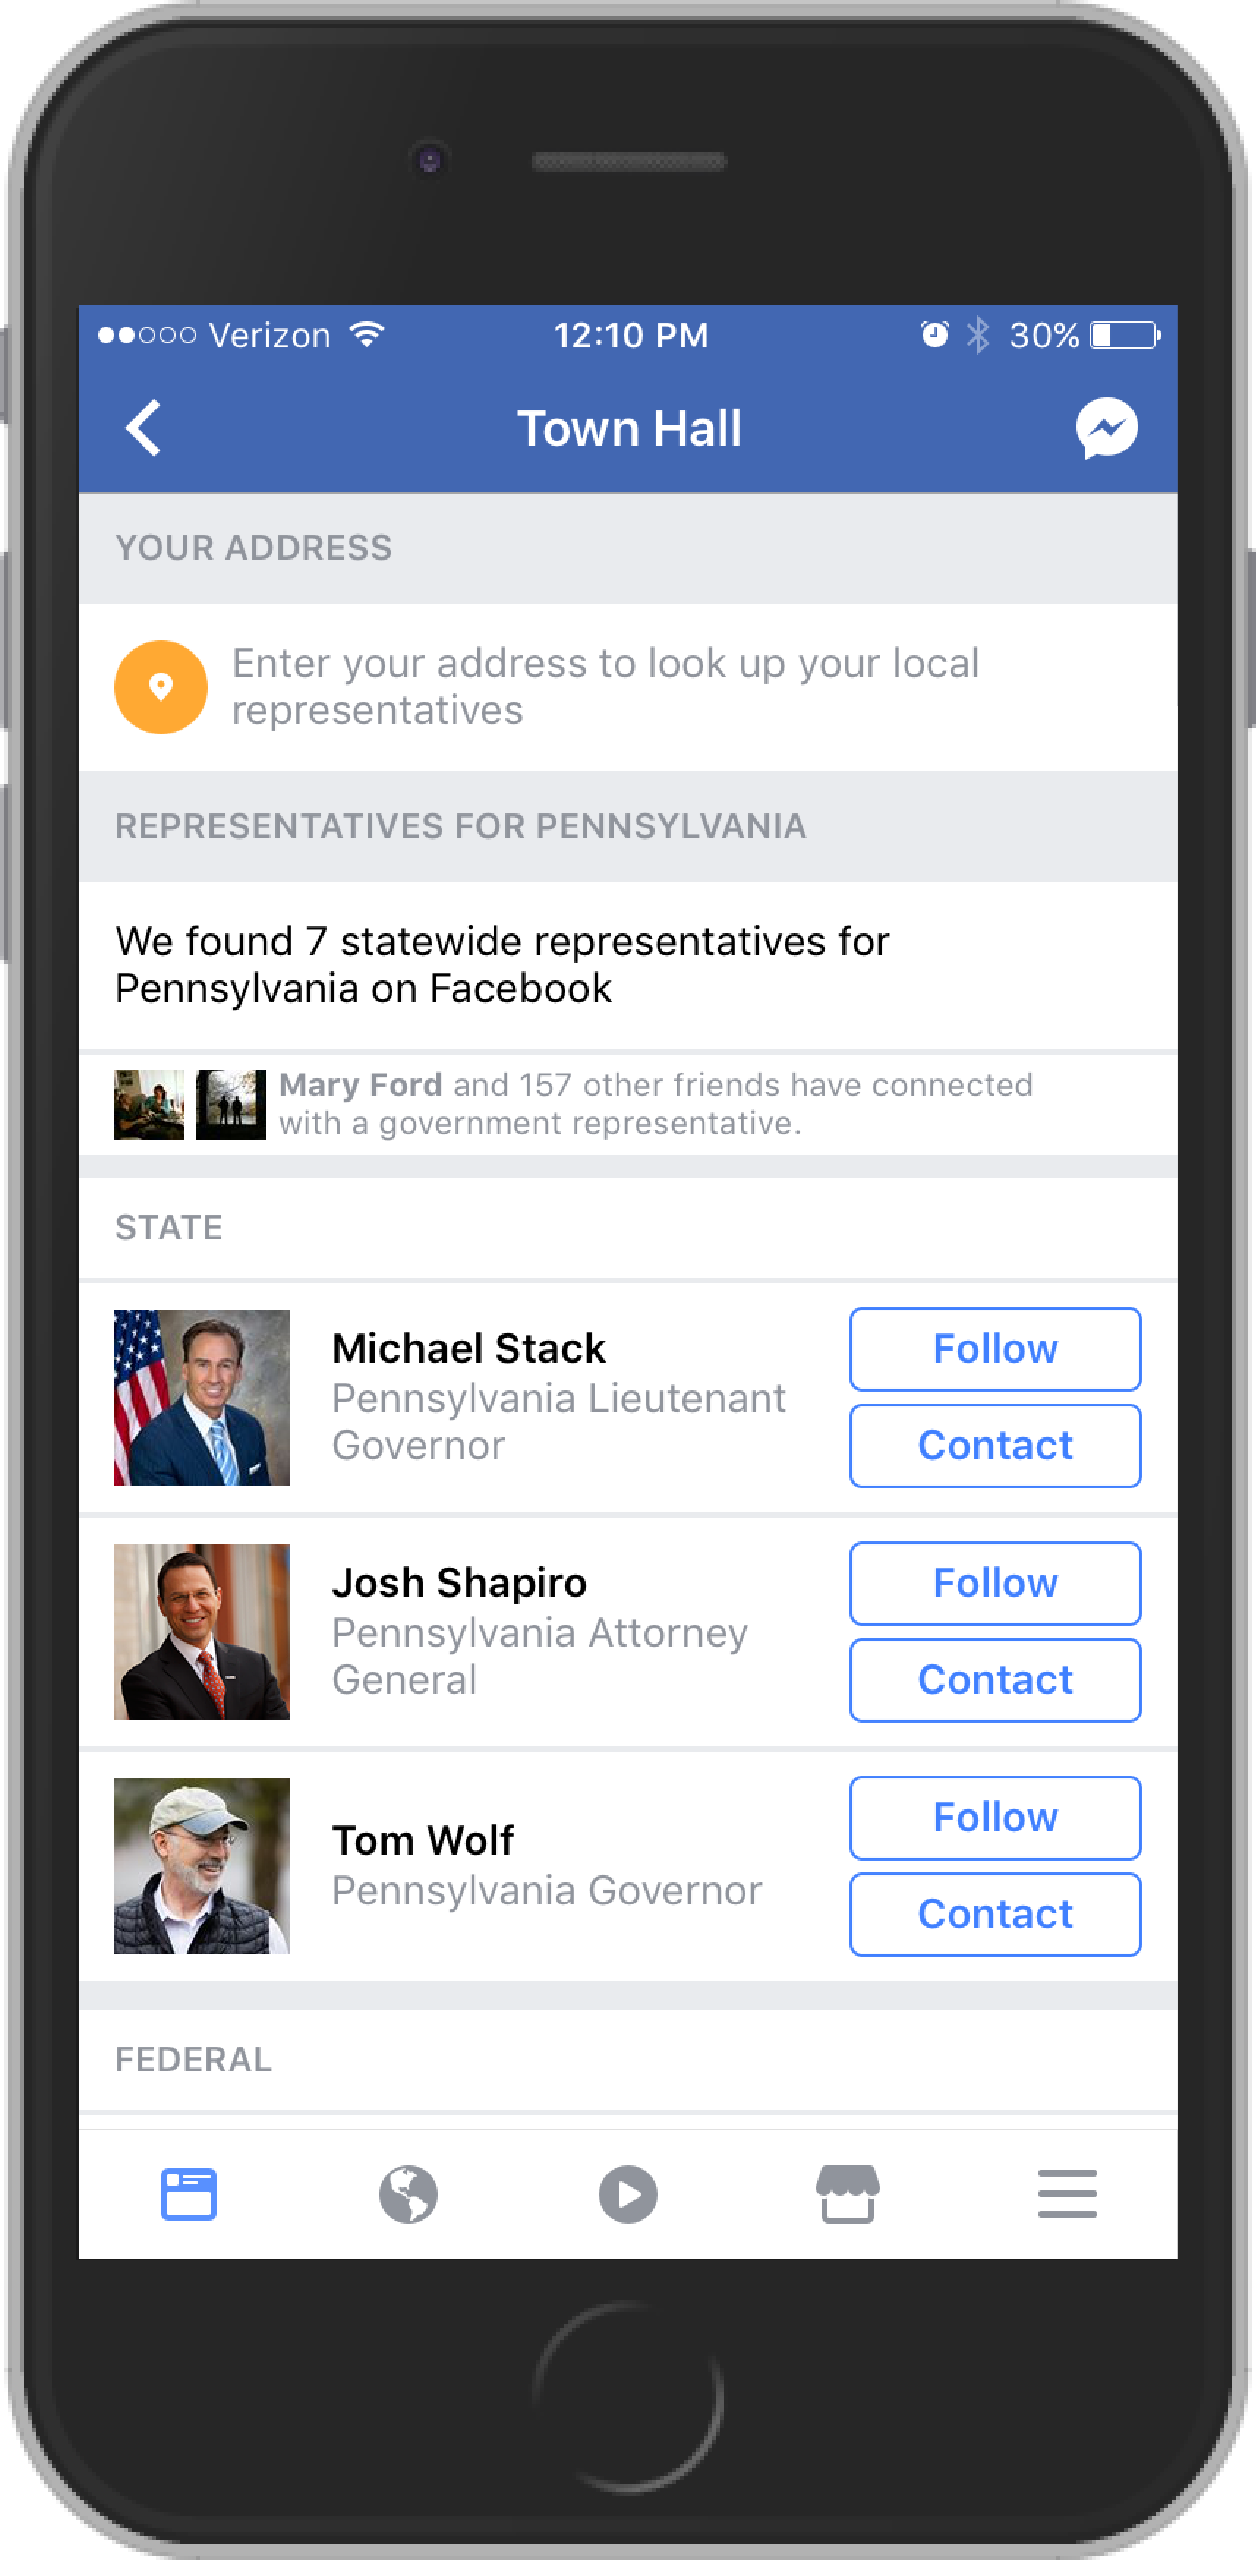 A screen shot of the Facebook Town Hall Application